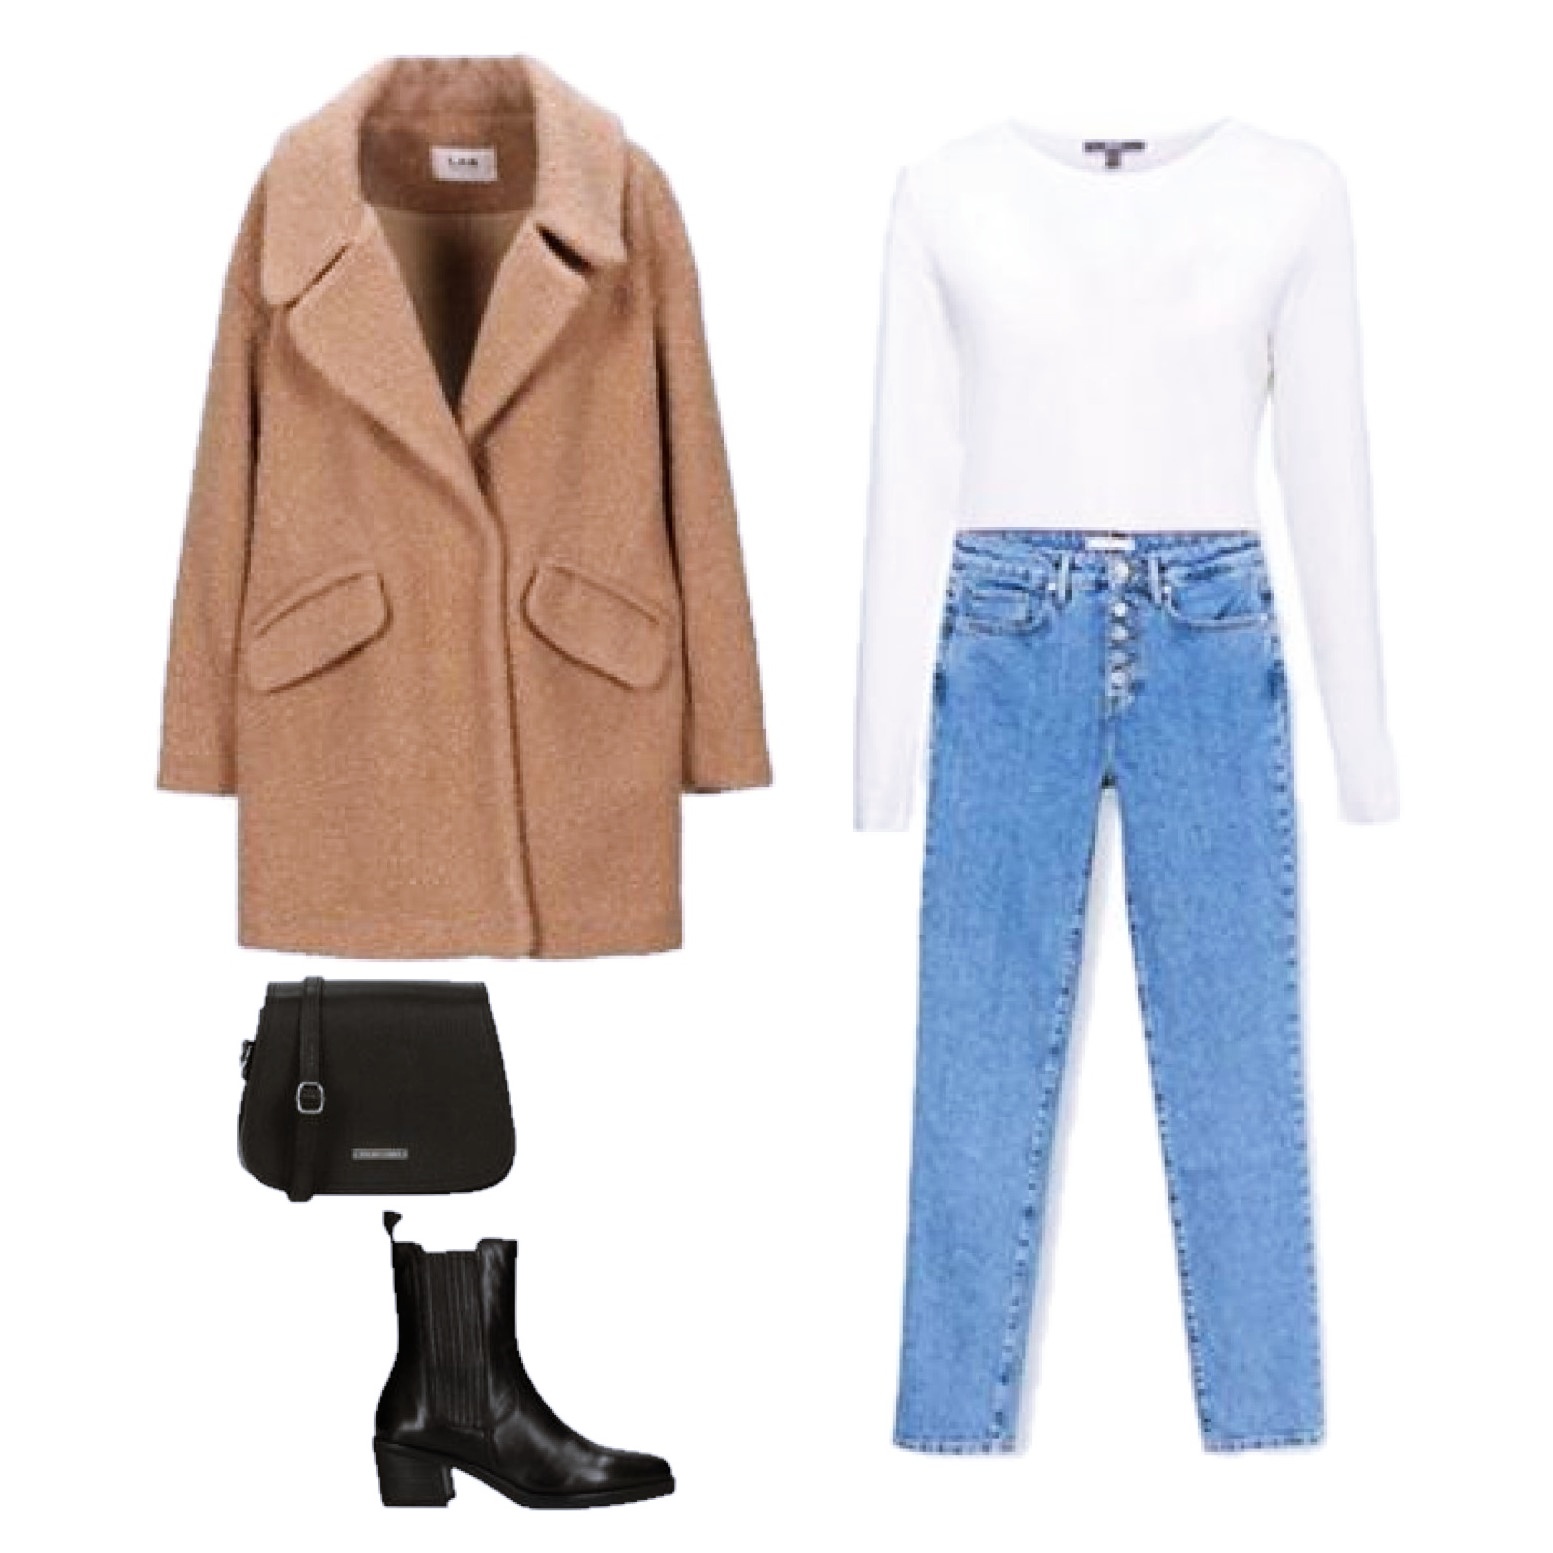 Outfit of the Day: a basic look with a camel coat